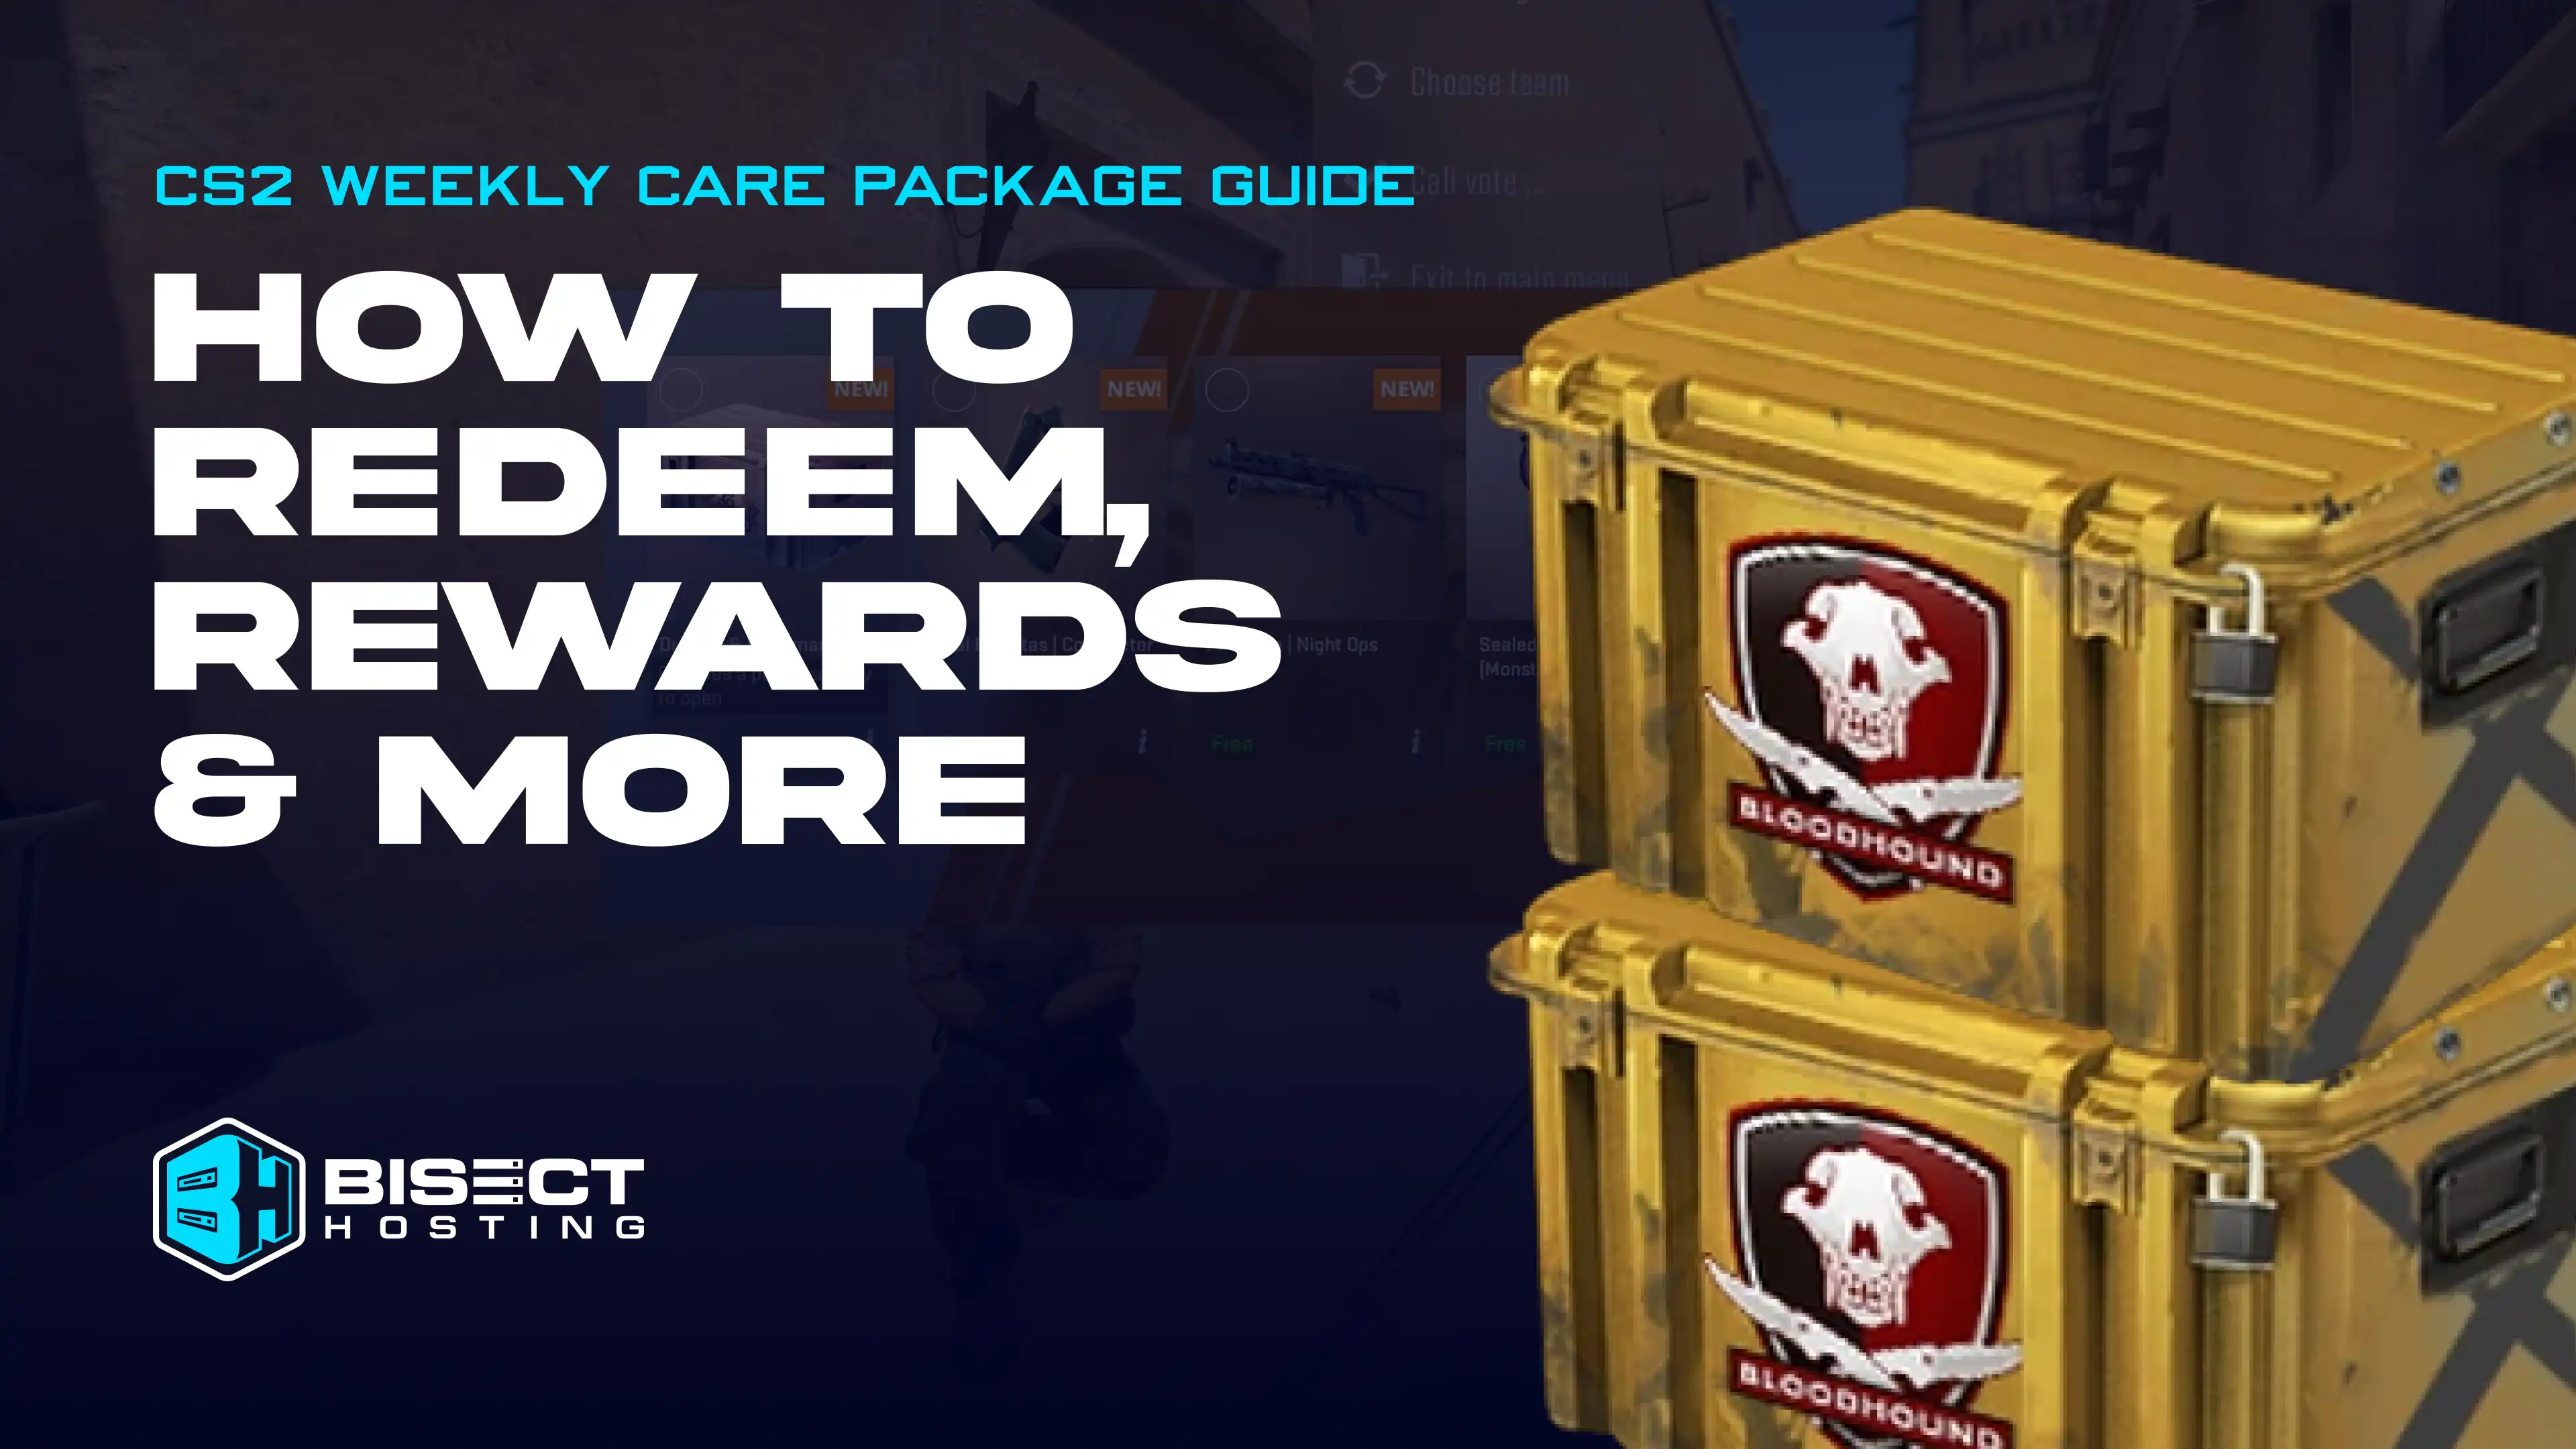 CS2 Weekly Care Package Guide: How to Redeem, Rewards, & More